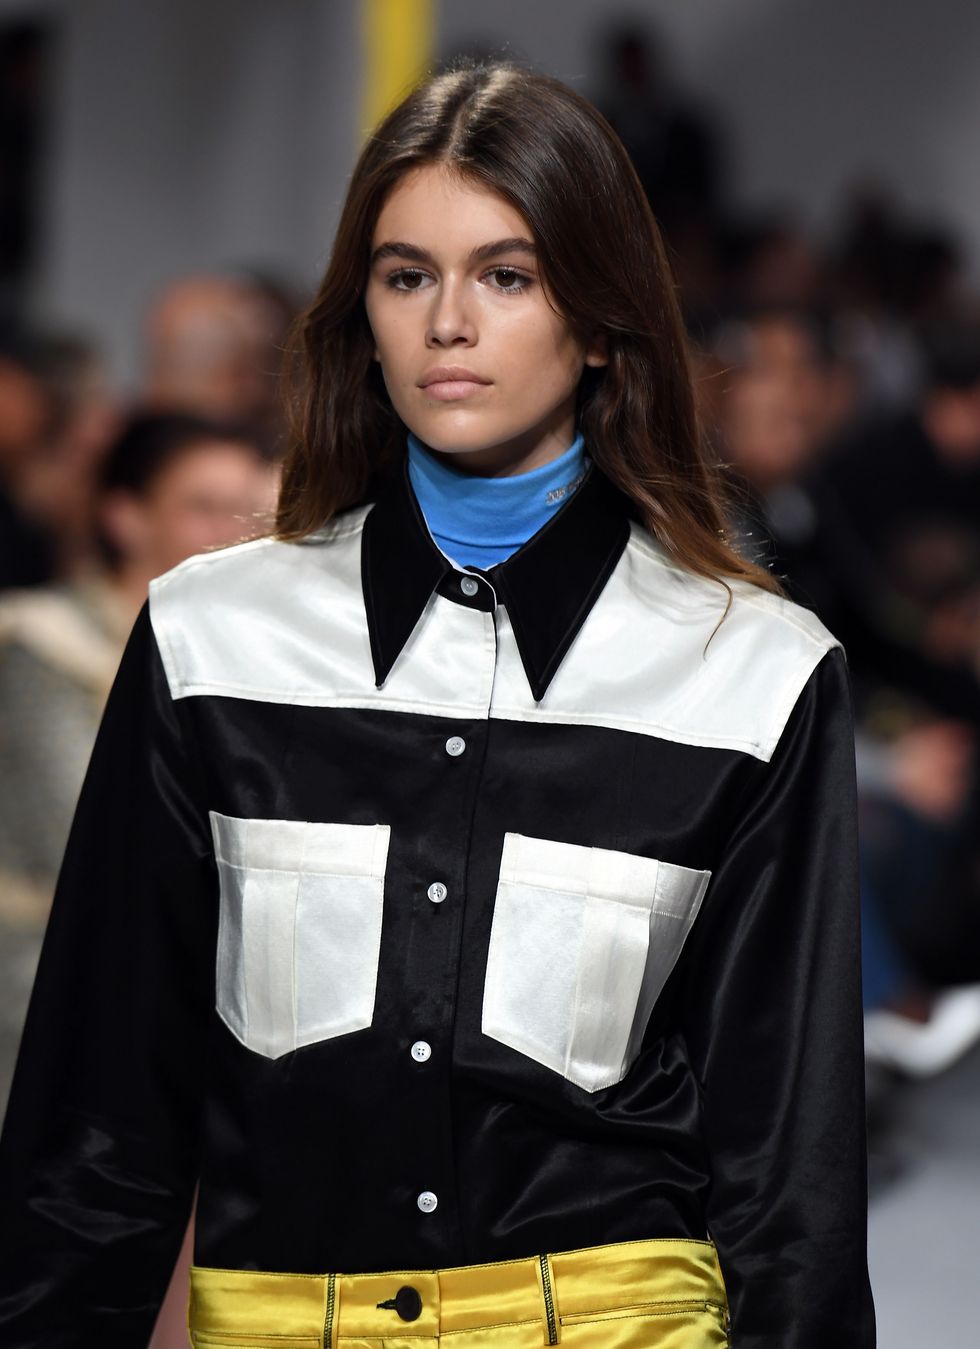 Model Kaia Gerber walks the runway for the Calvin Klein Collection fashion show during New York Fashion Week on September 7, 2017 in New York City. / AFP PHOTO / ANGELA WEISS        (Photo credit should read ANGELA WEISS/AFP/Getty Images)